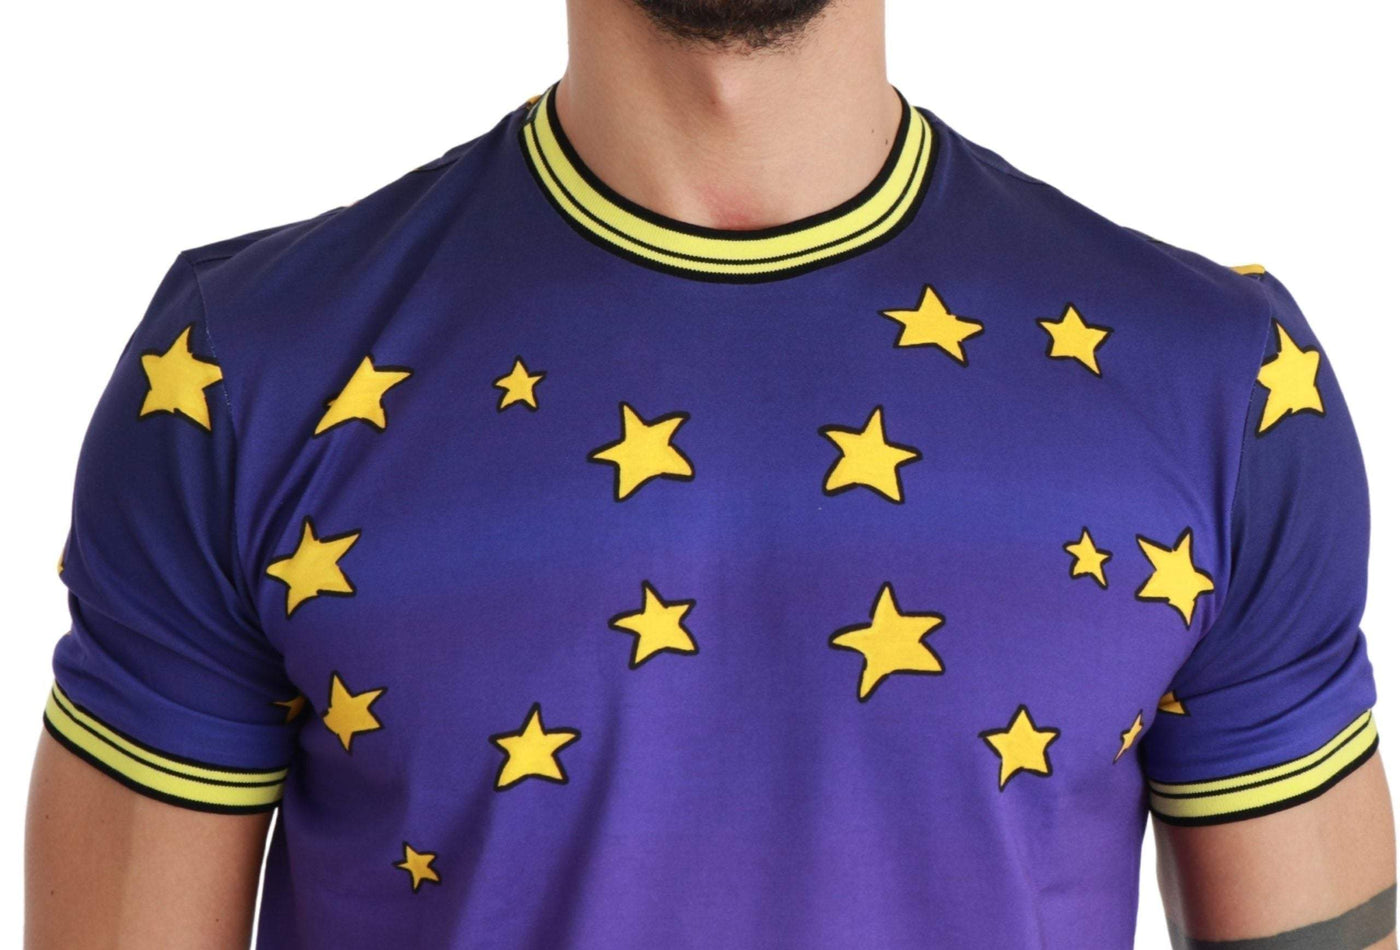 Dolce & Gabbana Purple  Cotton Top 2019 Year of the Pig  T-shirt #men, Brand_Dolce & Gabbana, Catch, Dolce & Gabbana, feed-agegroup-adult, feed-color-purple, feed-gender-male, feed-size-IT44 | XS, feed-size-IT46 | S, feed-size-IT48 | M, feed-size-IT50 | L, feed-size-IT52 | L, Gender_Men, IT44 | XS, IT46 | S, IT48 | M, IT50 | L, IT52 | L, Kogan, Men - New Arrivals, Purple, T-shirts - Men - Clothing at SEYMAYKA